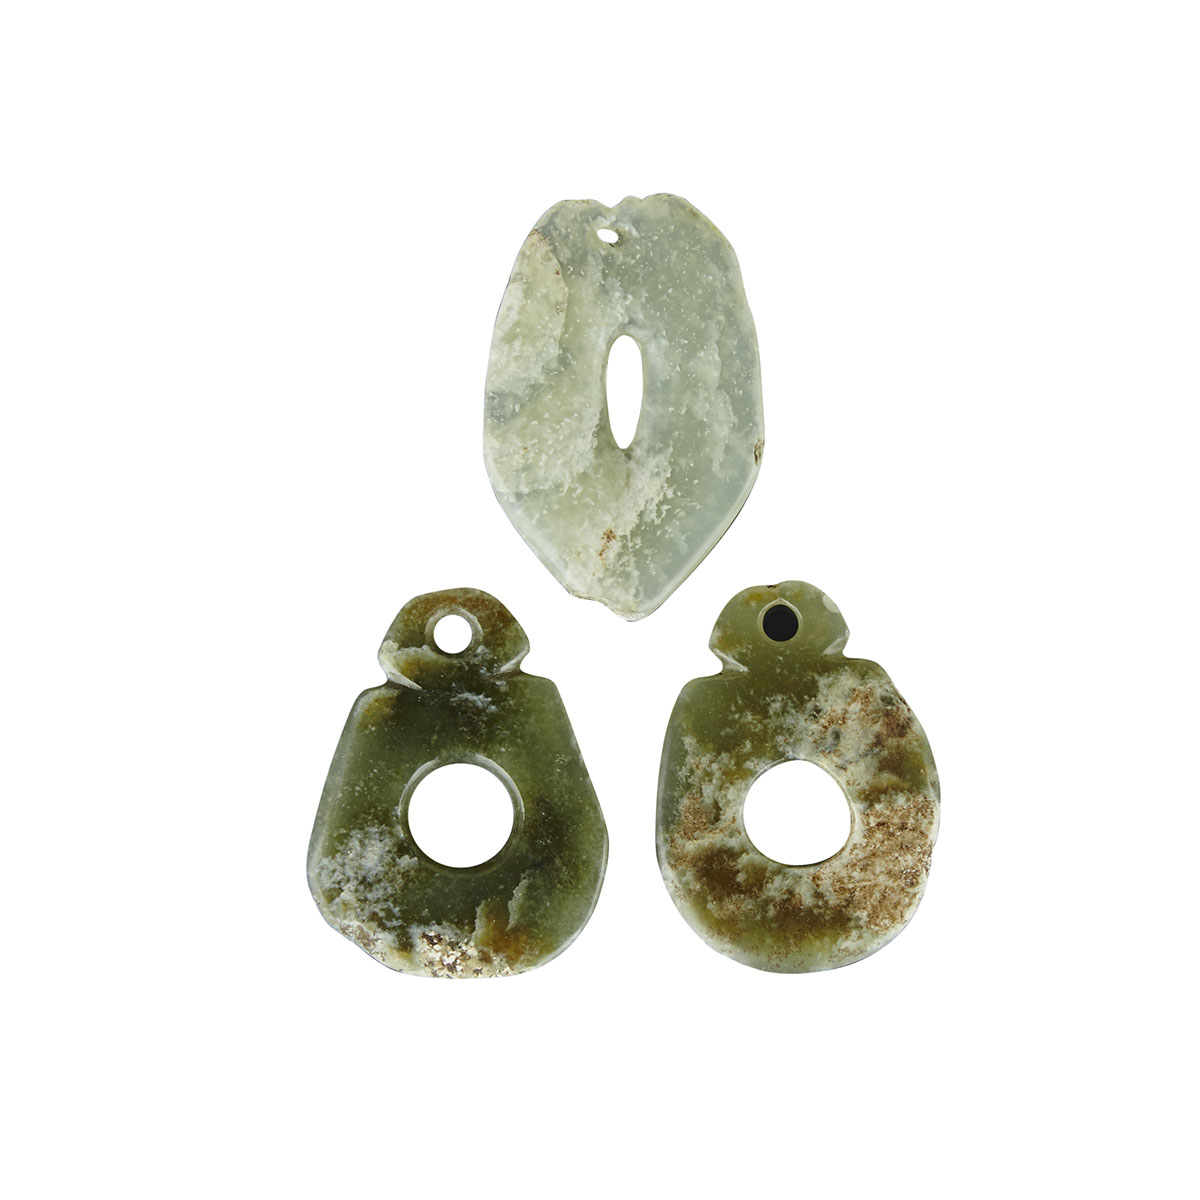 A Set of Three Jade Bi Discs, Hongshan Culture, Neolithic Period or Later